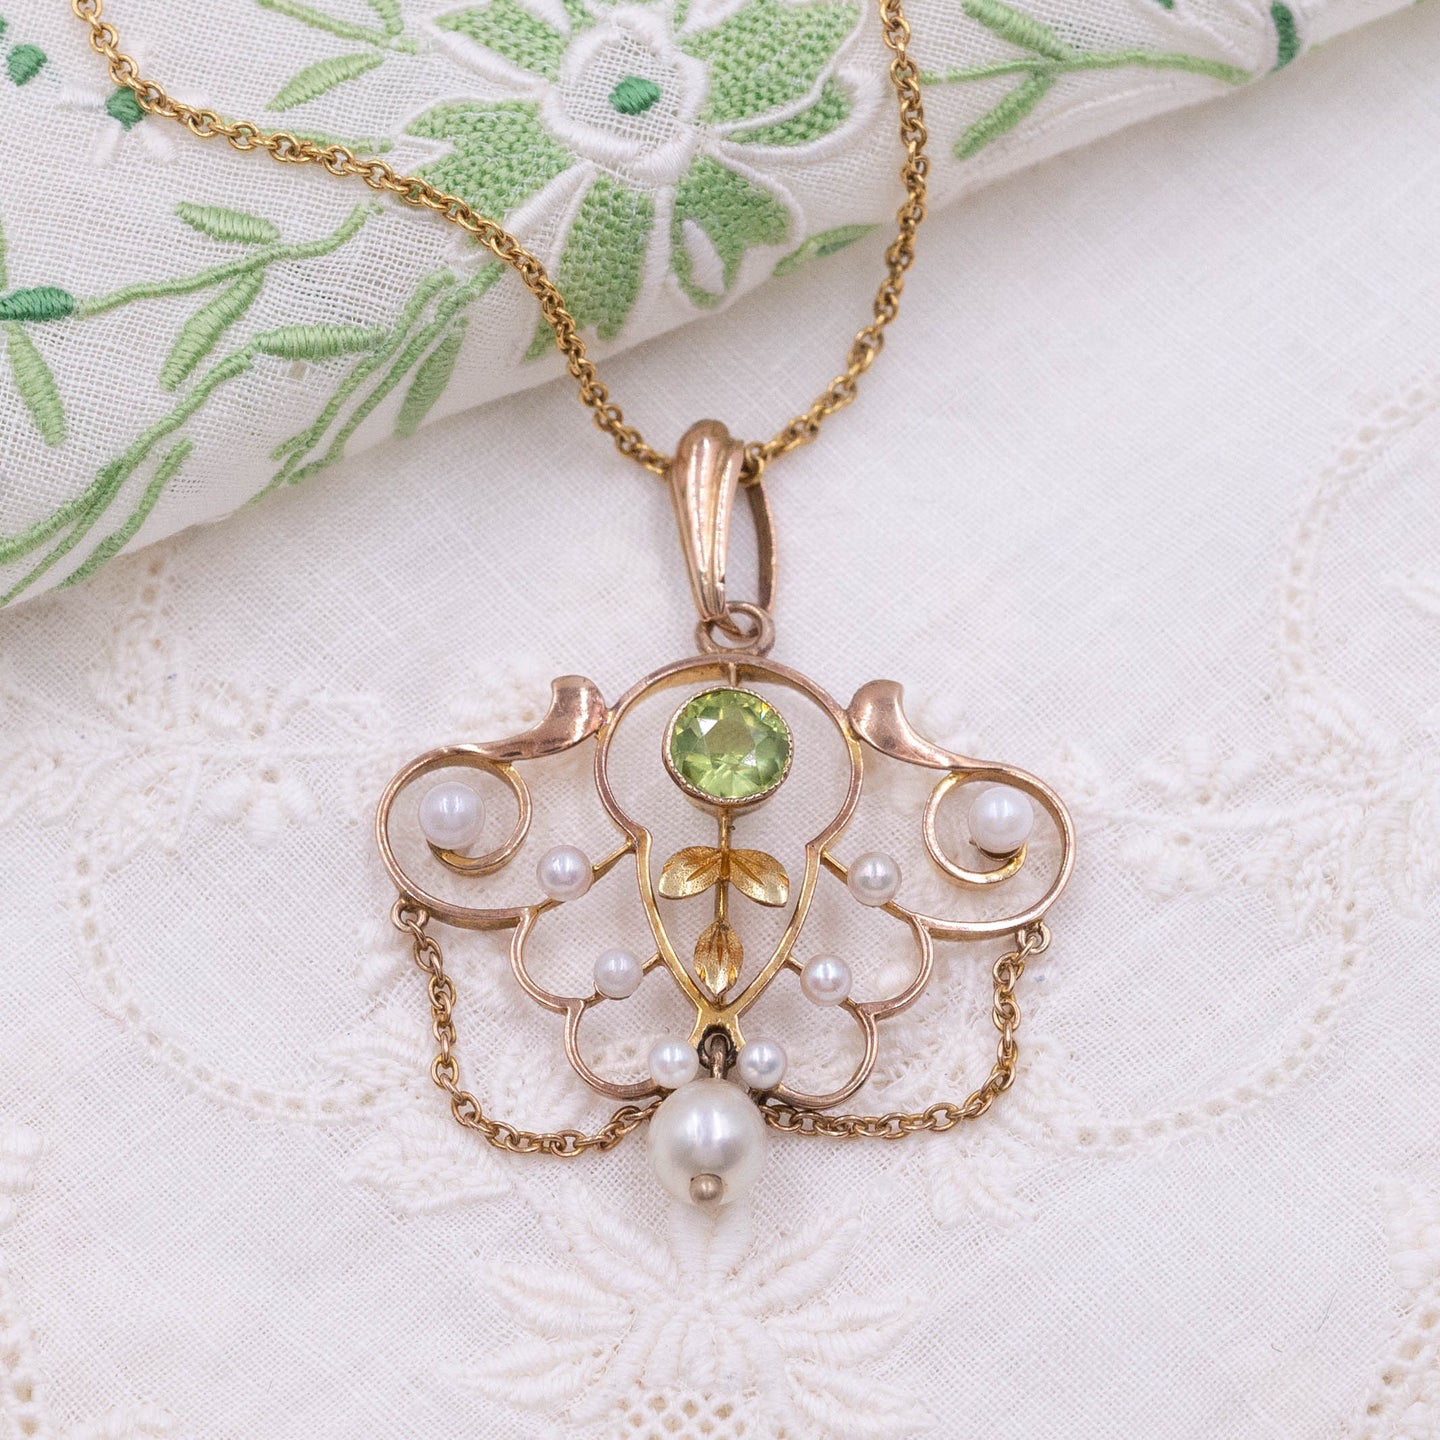 Peridot & Natural Pearl Lavaliere Necklace c. 1900s